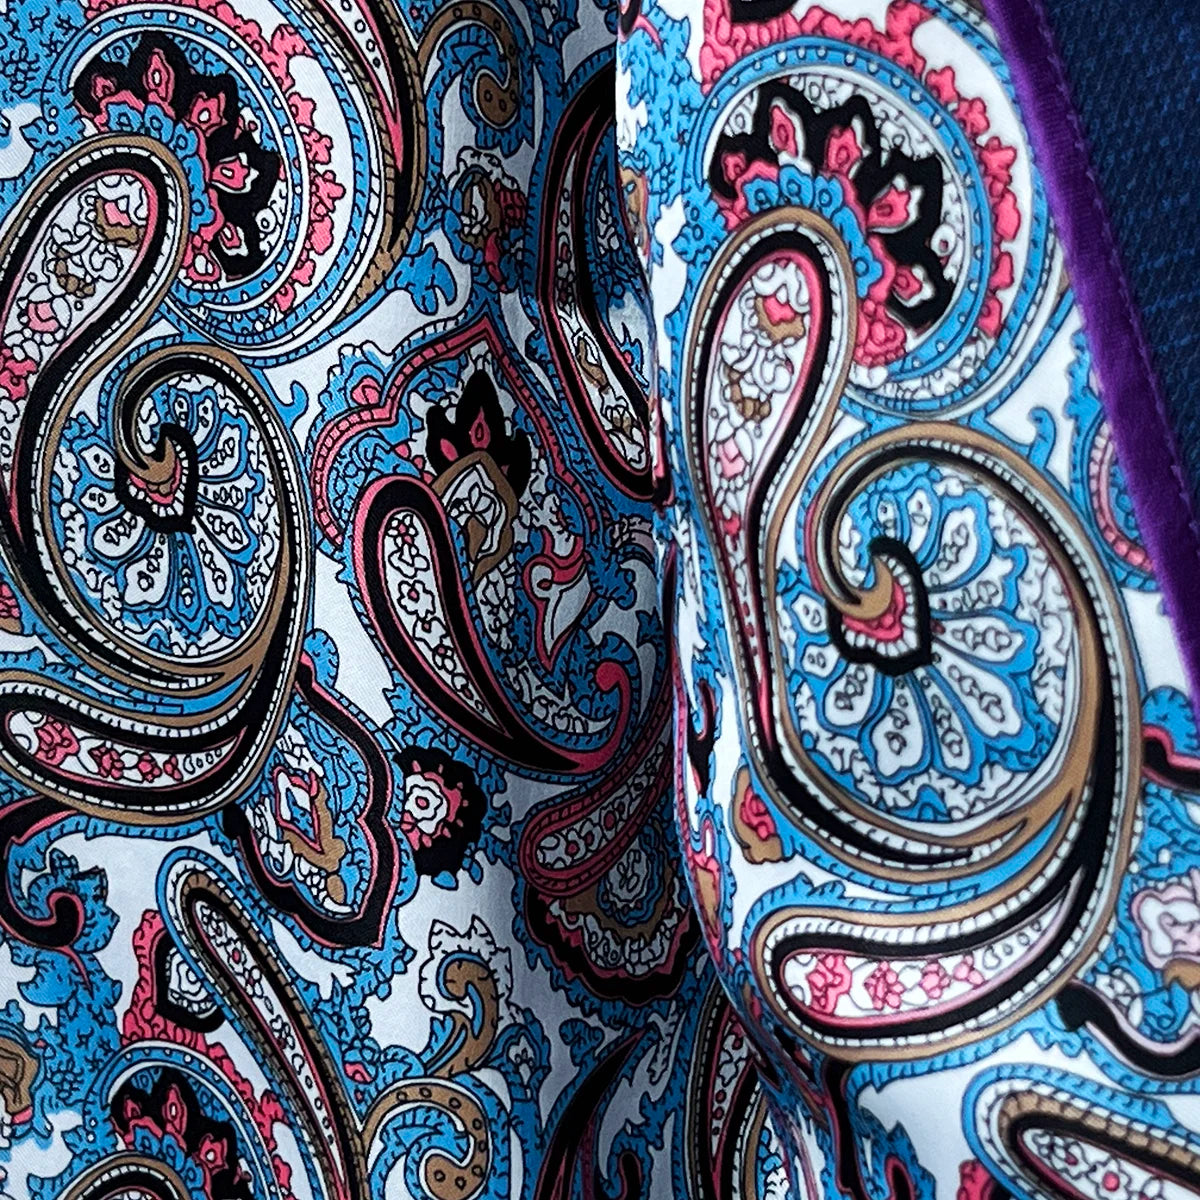 View of the flash linings with a multi-color paisley print inside the royal blue suit jacket.